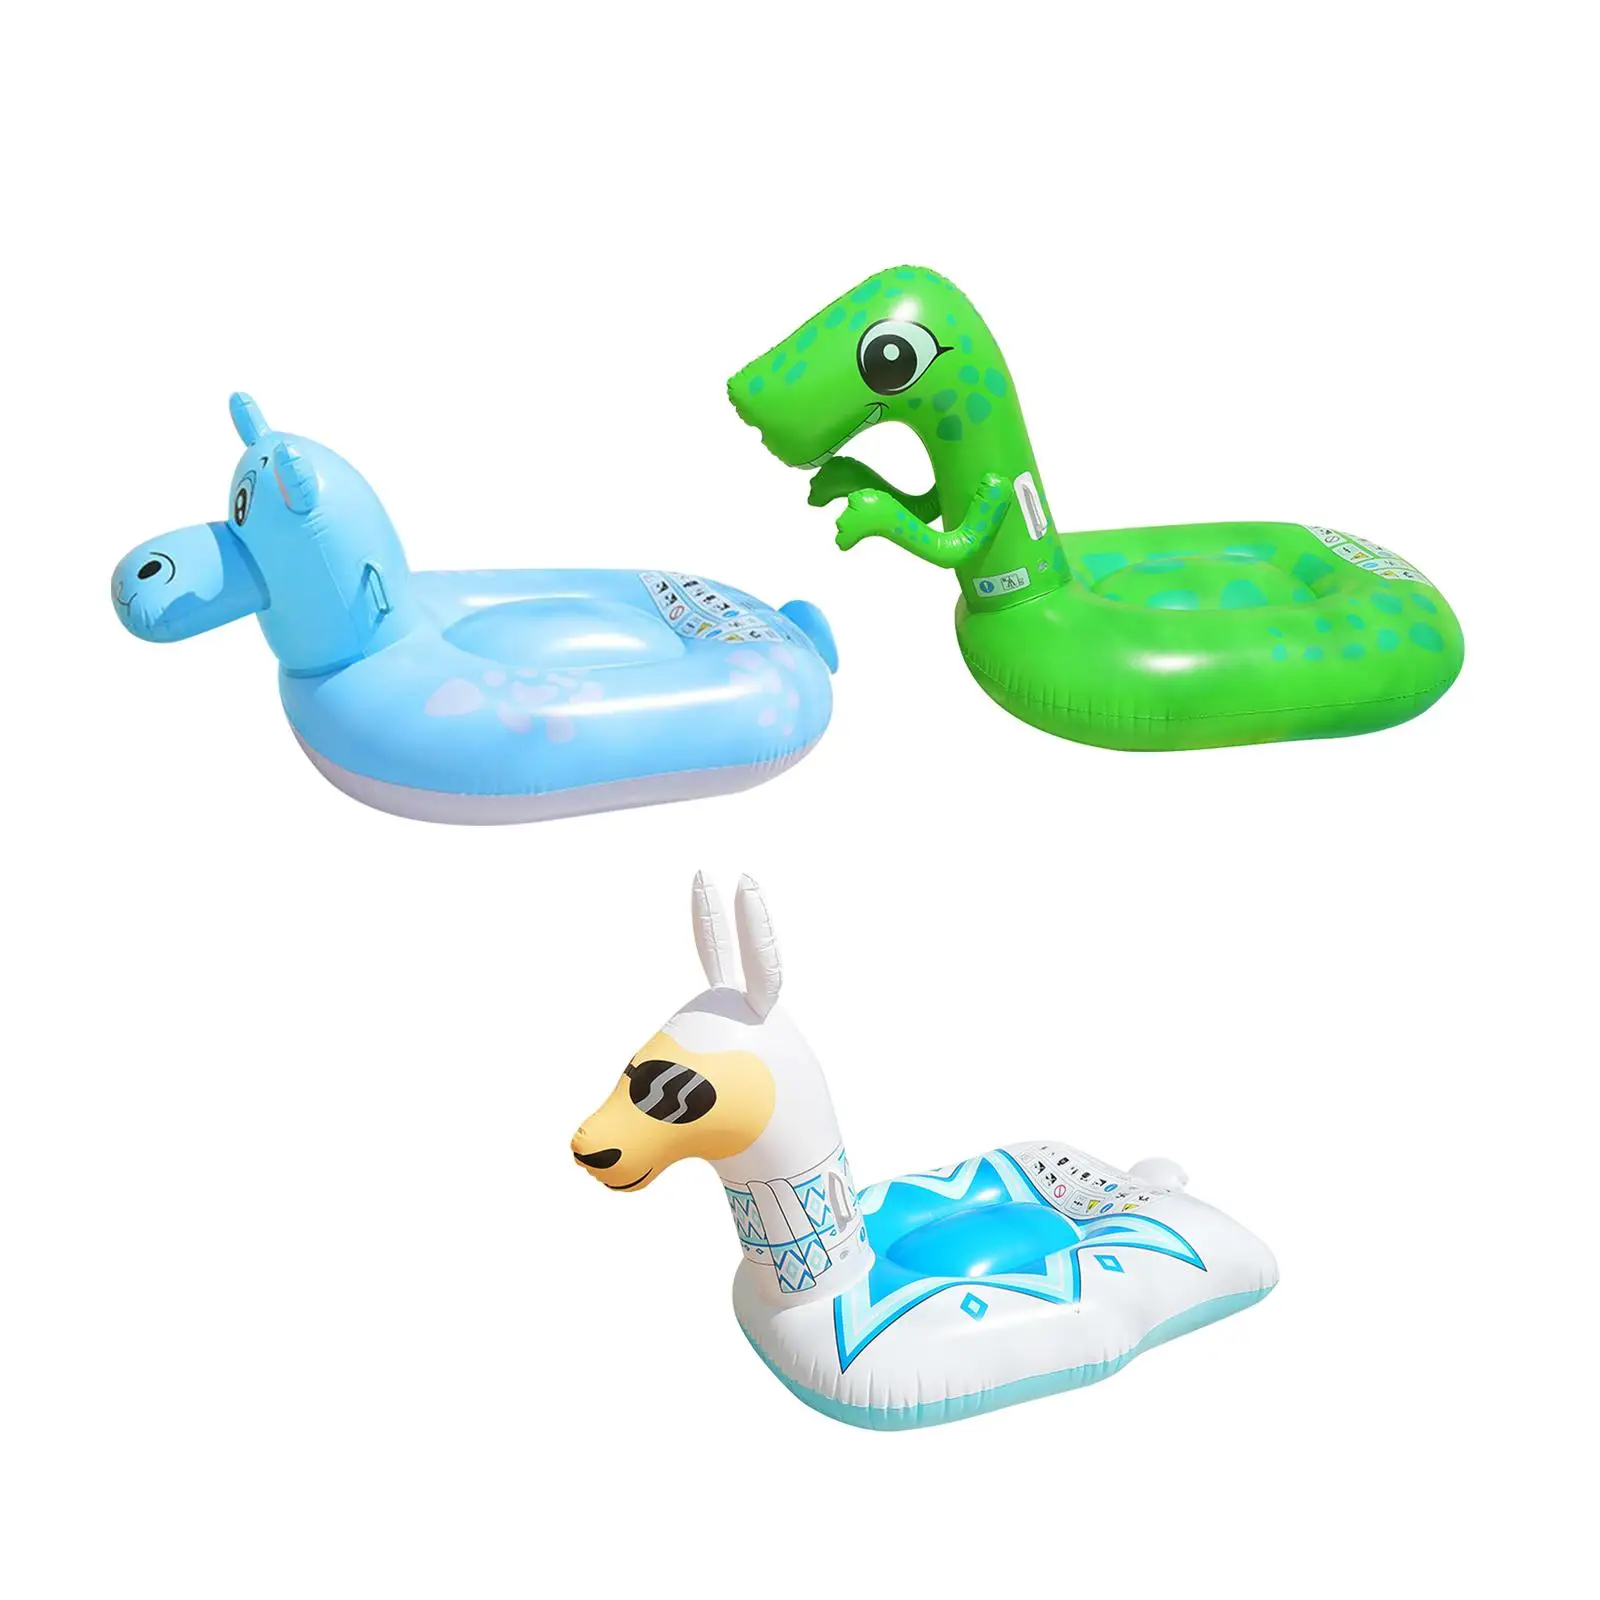 Inflatable Pool Float Novelty Large Adult Size Pool Floatie Inflatable Ride on for Swimming Pool Beach Party Summer Raft